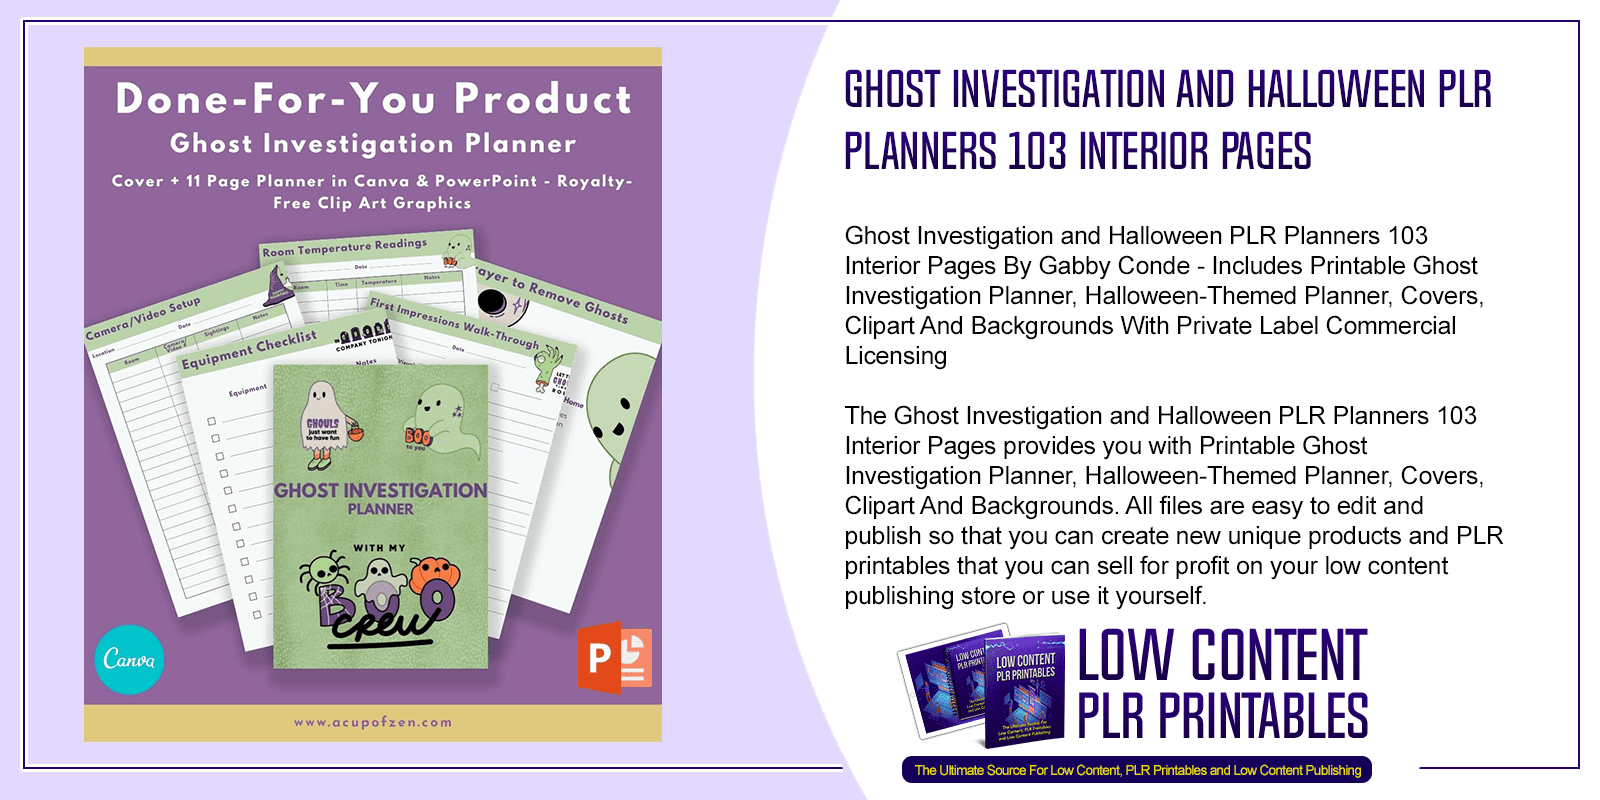 Ghost Investigation and Halloween PLR Planners 103 Interior Pages